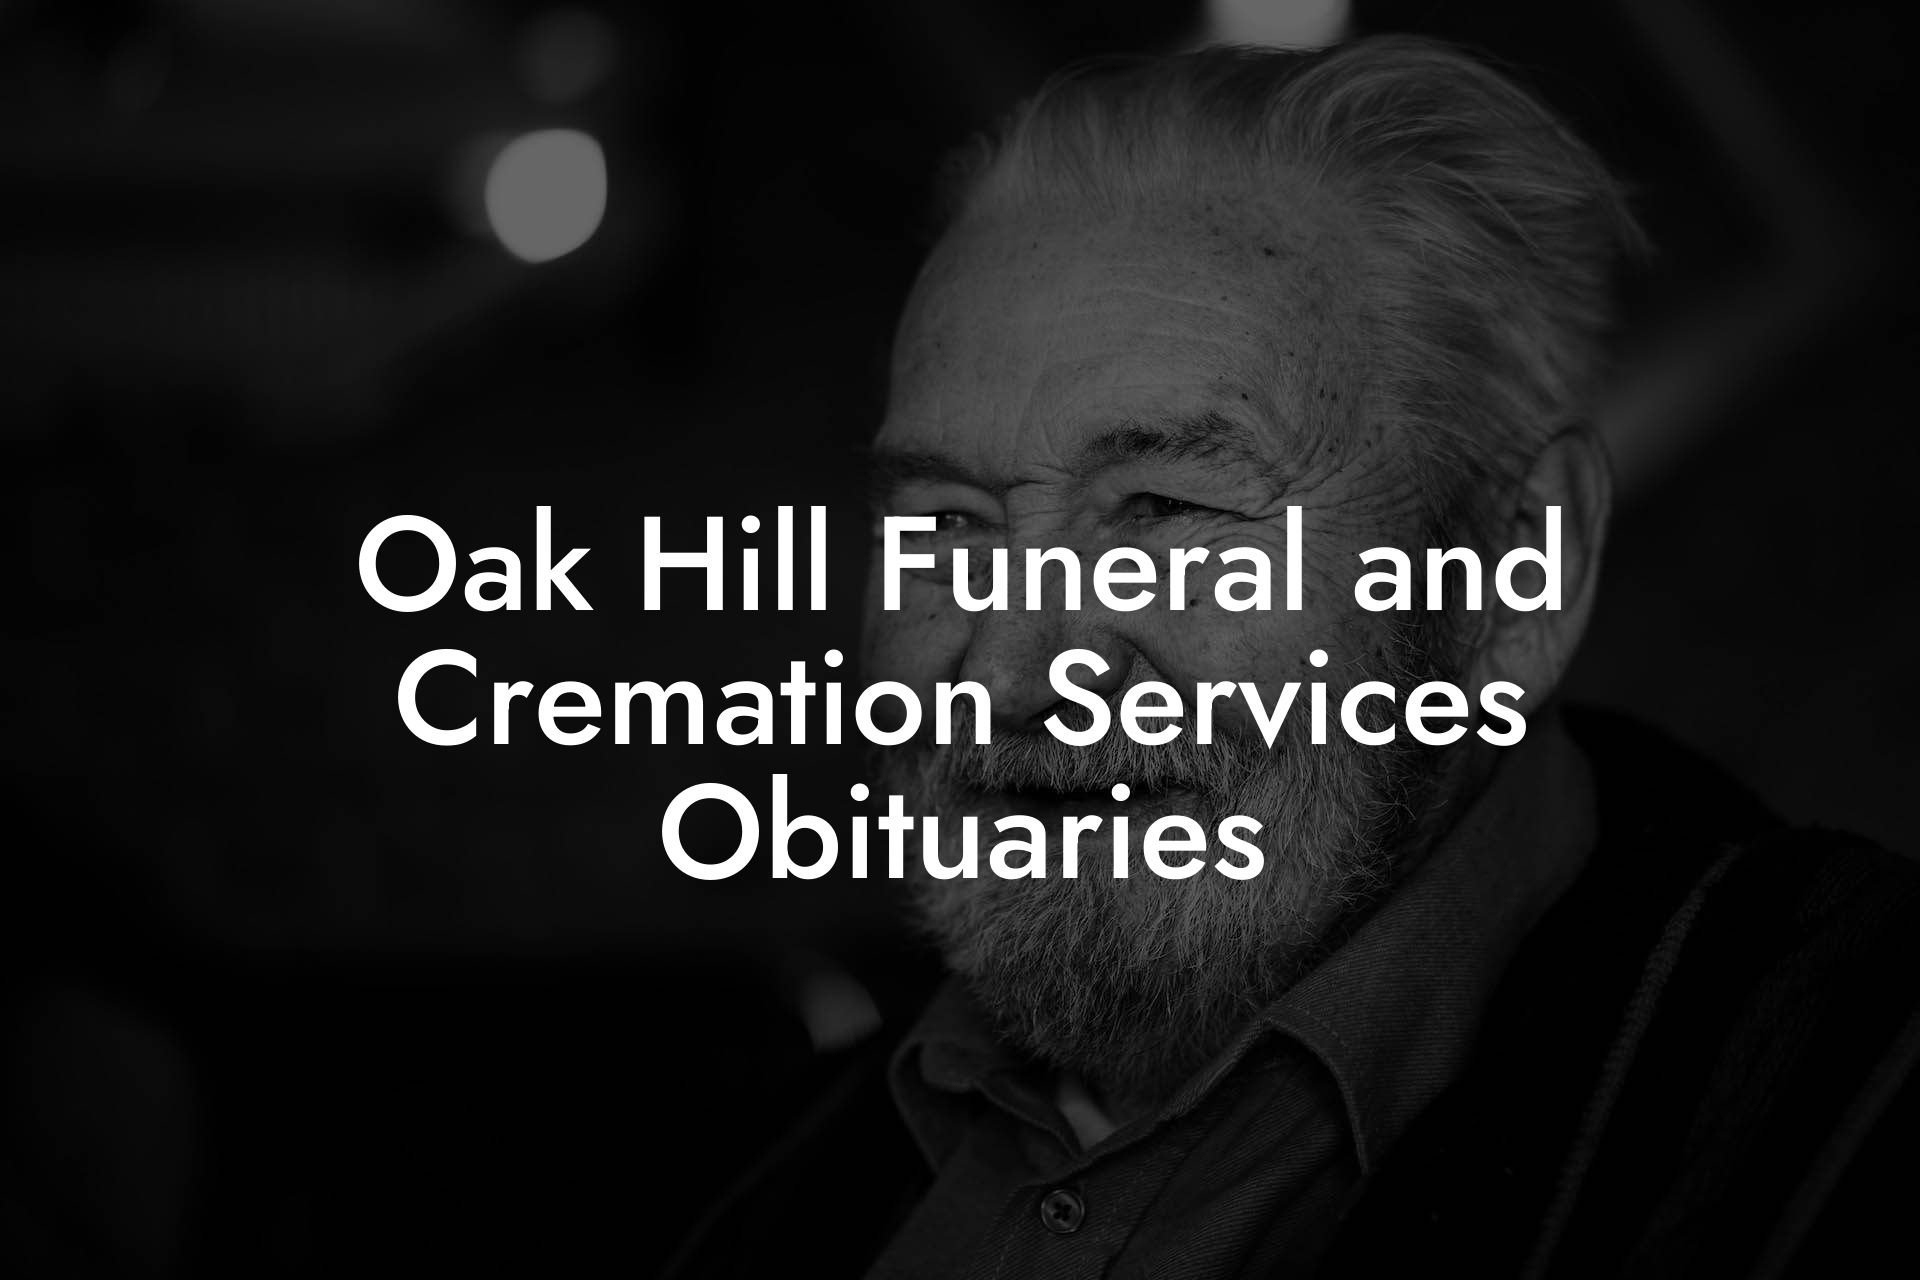 Oak Hill Funeral and Cremation Services Obituaries